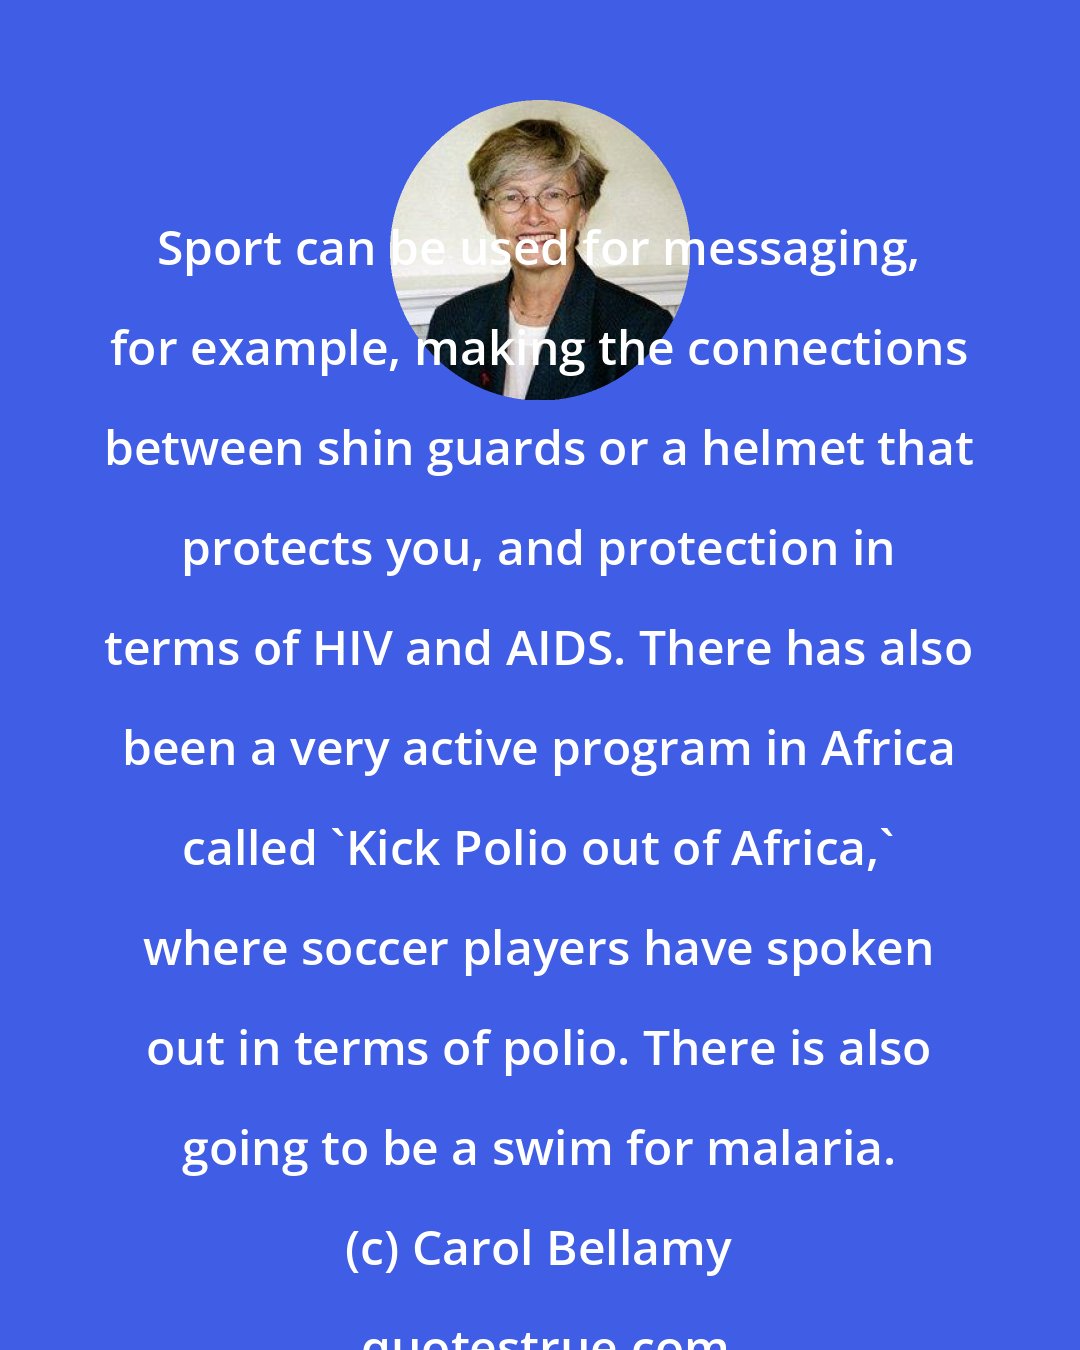 Carol Bellamy: Sport can be used for messaging, for example, making the connections between shin guards or a helmet that protects you, and protection in terms of HIV and AIDS. There has also been a very active program in Africa called 'Kick Polio out of Africa,' where soccer players have spoken out in terms of polio. There is also going to be a swim for malaria.